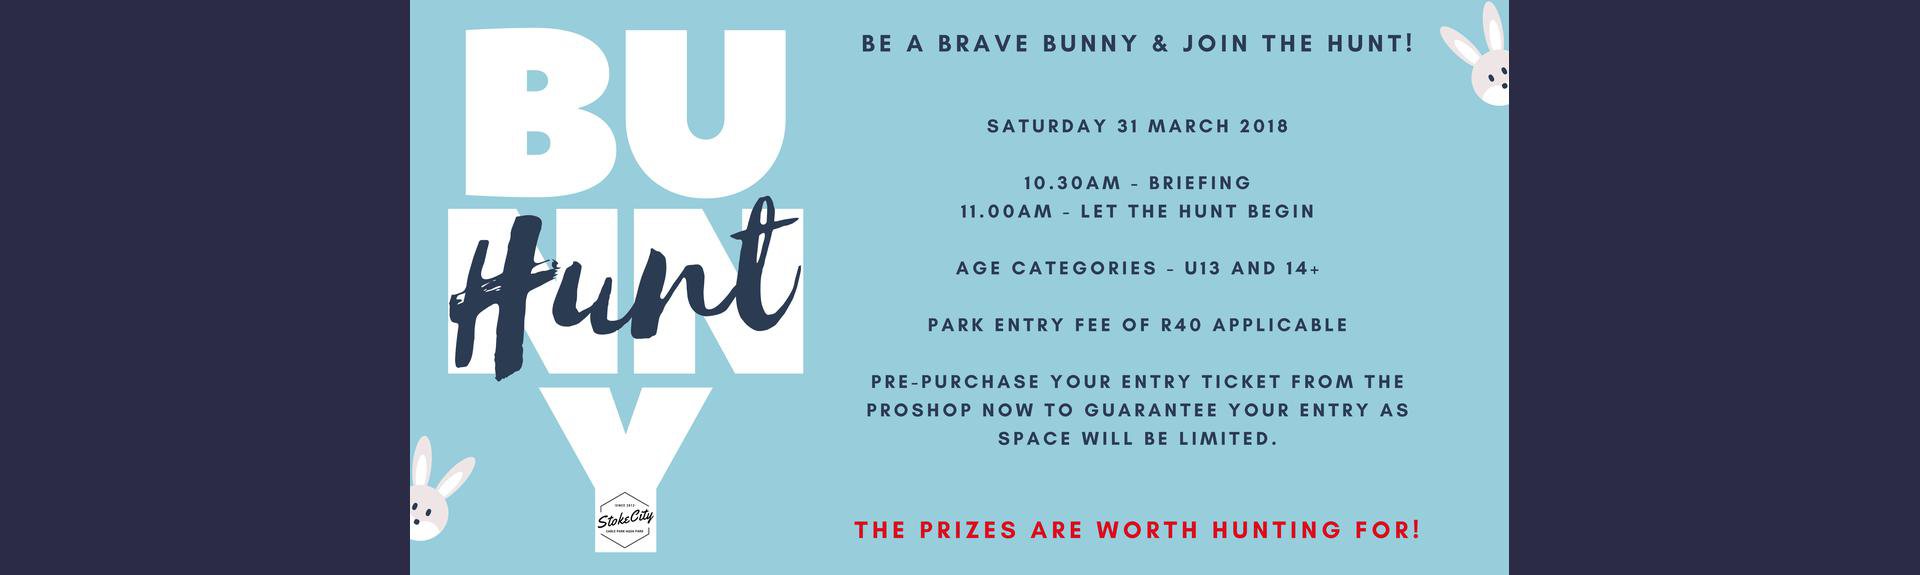 Join the 'Bunny Hunt'